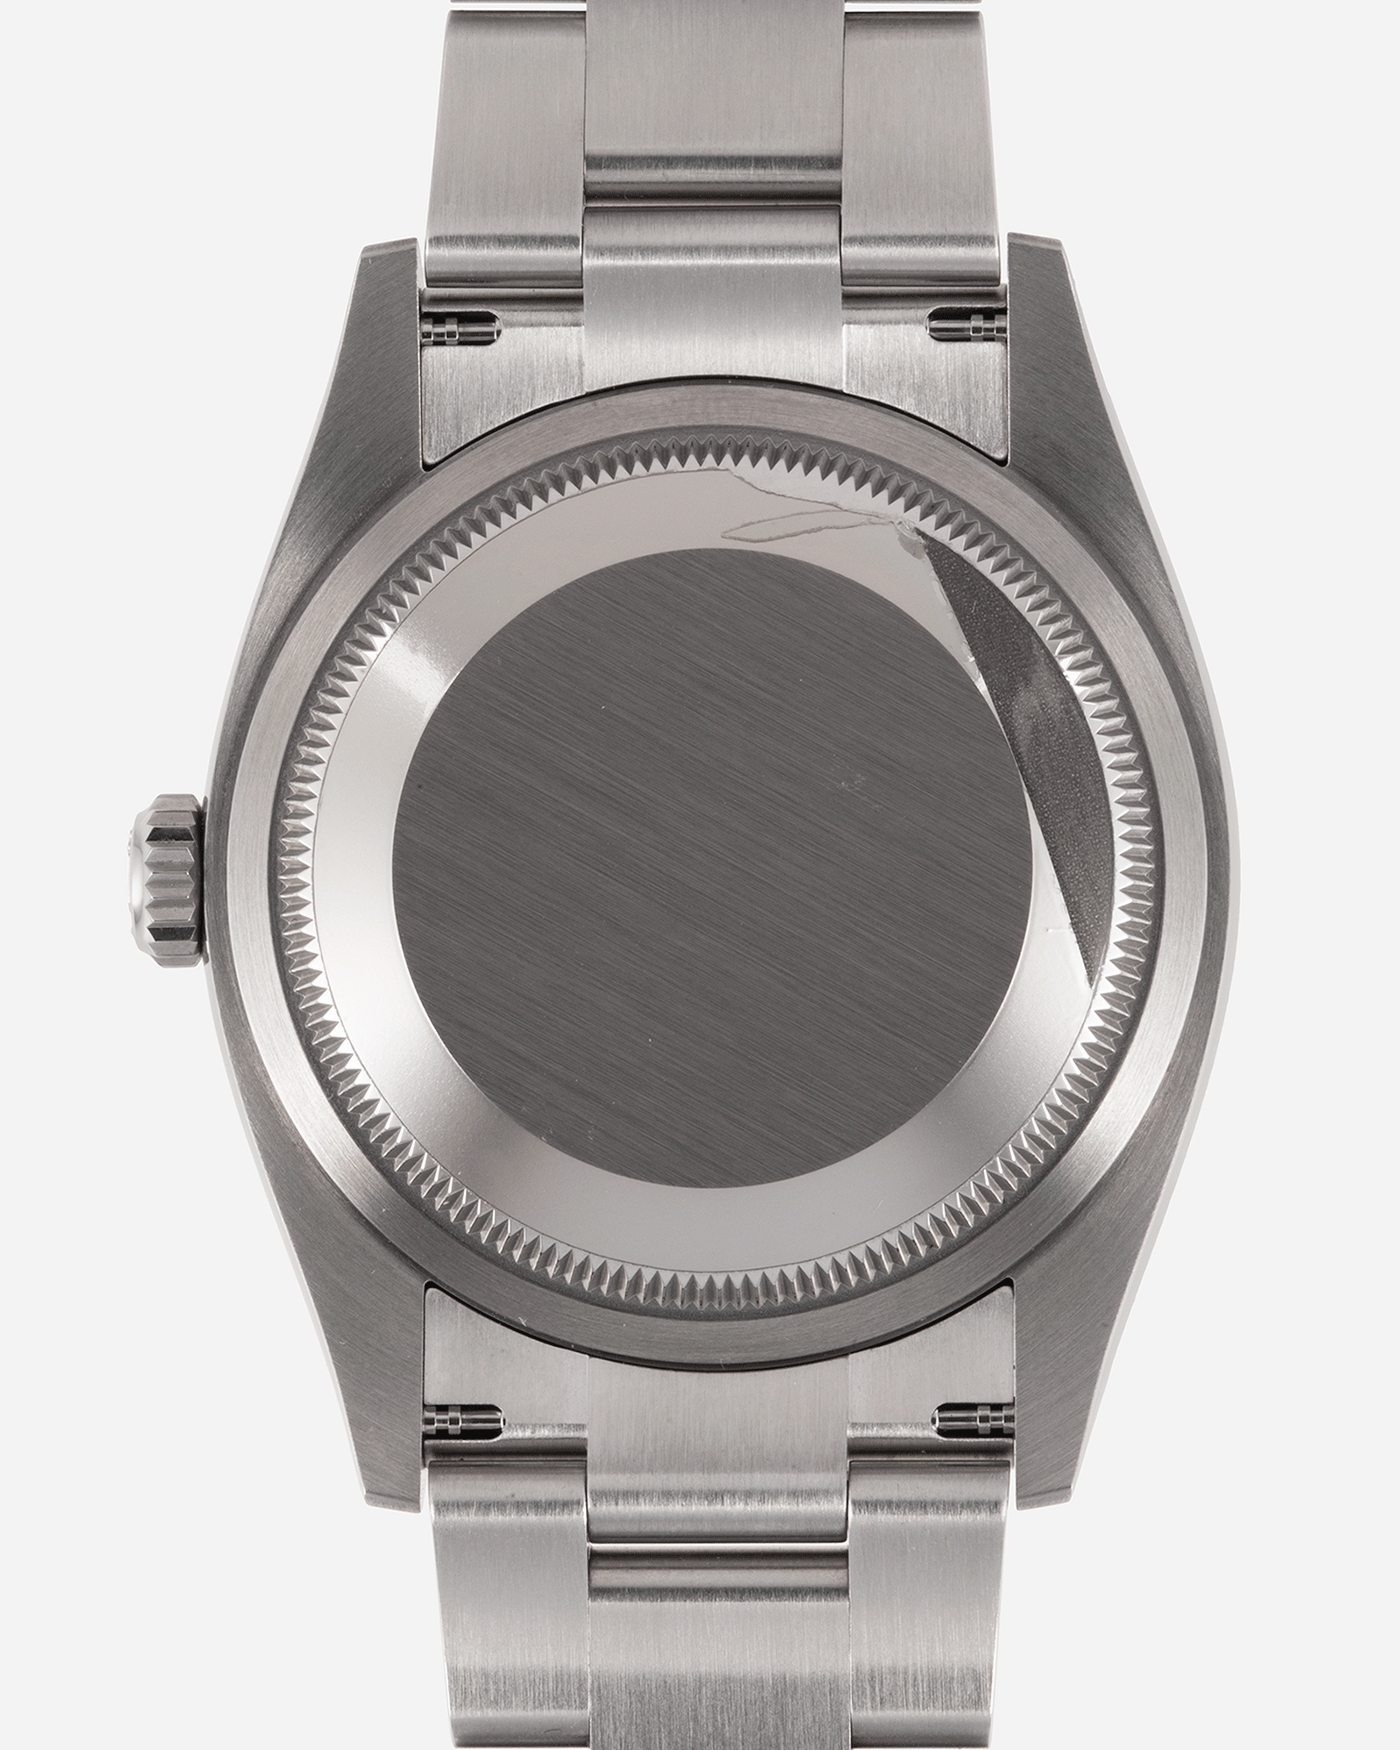 Brand: Rolex Year: 2021 Model: Oyster Perpetual 36 Reference Number: 126000 Material: 904L Stainless Steel Movement: Cal. 3230 Case Diameter: 36mm Bracelet: Stainless Steel Rolex Oyster Bracelet